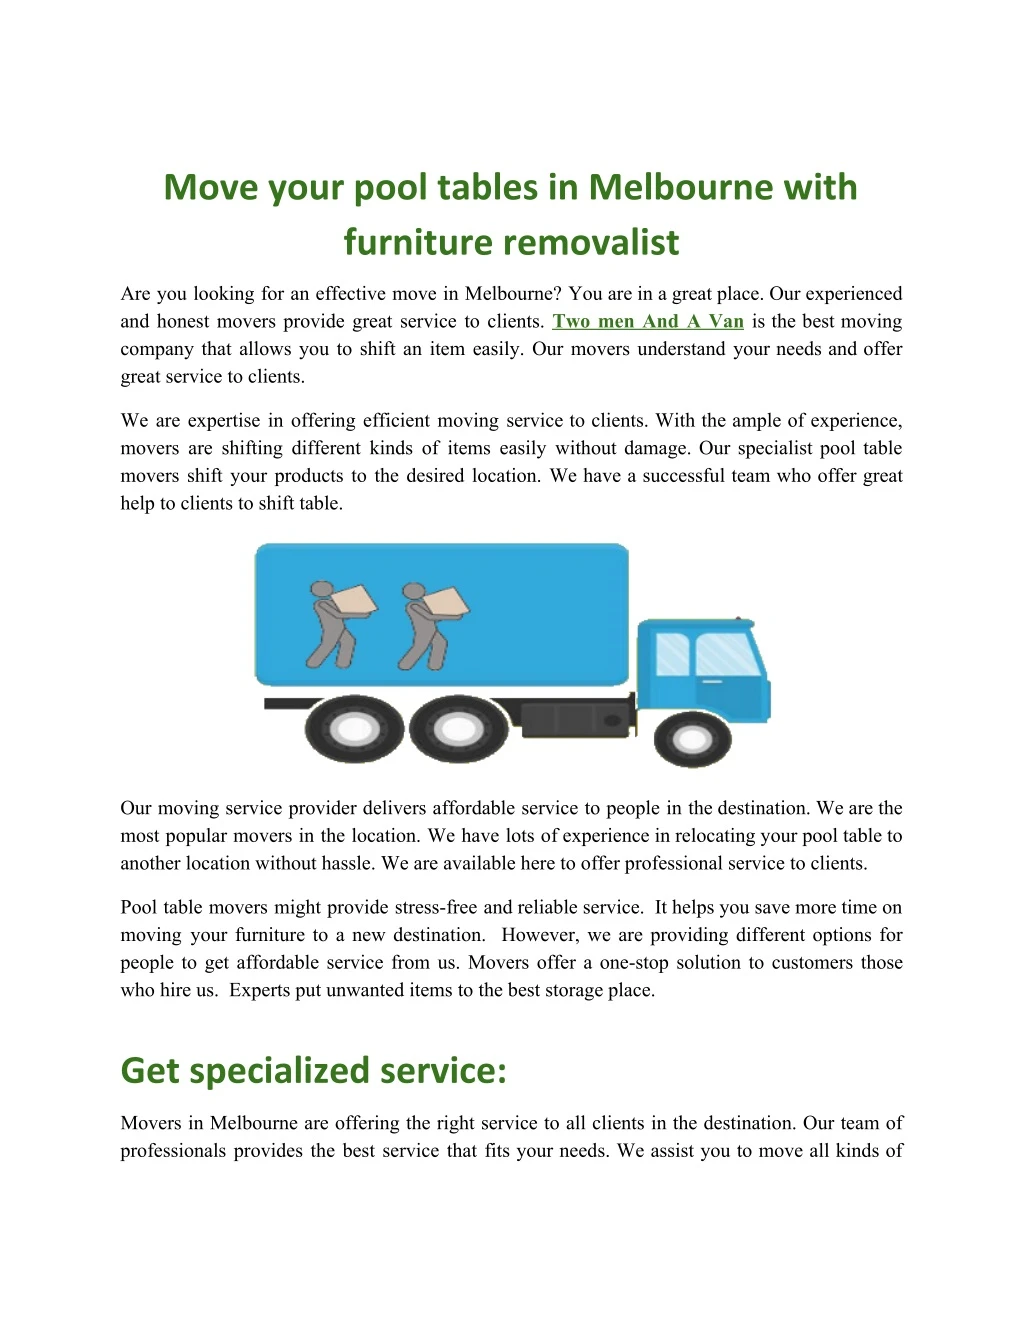 move your pool tables in melbourne with furniture